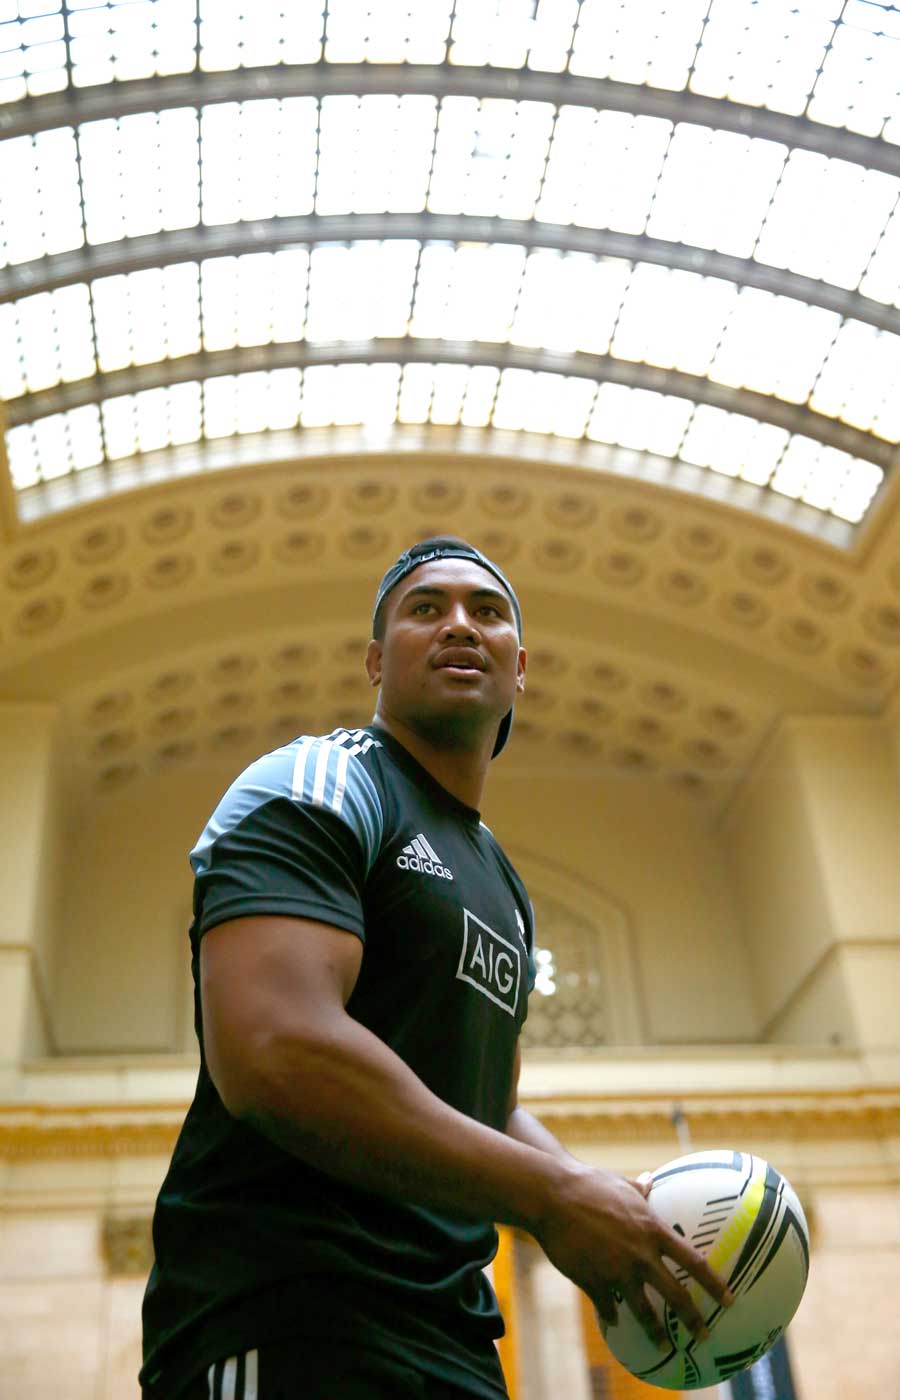 Julian Savea passes a rugby ball during a New Zealand All Blacks community skills session